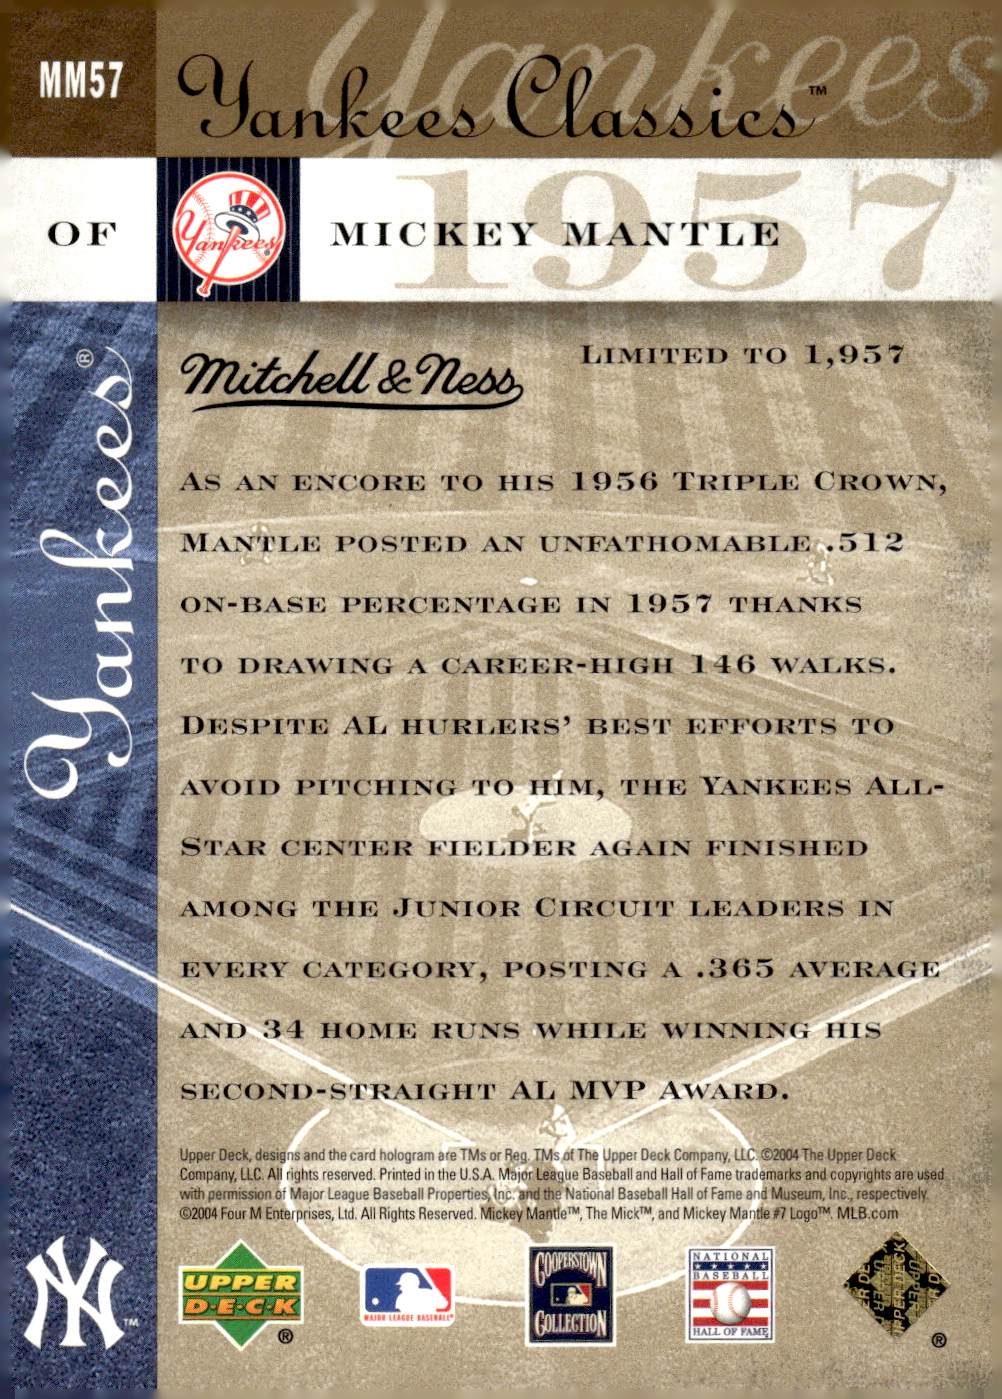 2004 UD Yankees Classics Mitchell and Ness Cards #MM57A Mickey Mantle 1957 MVP/1957 back image